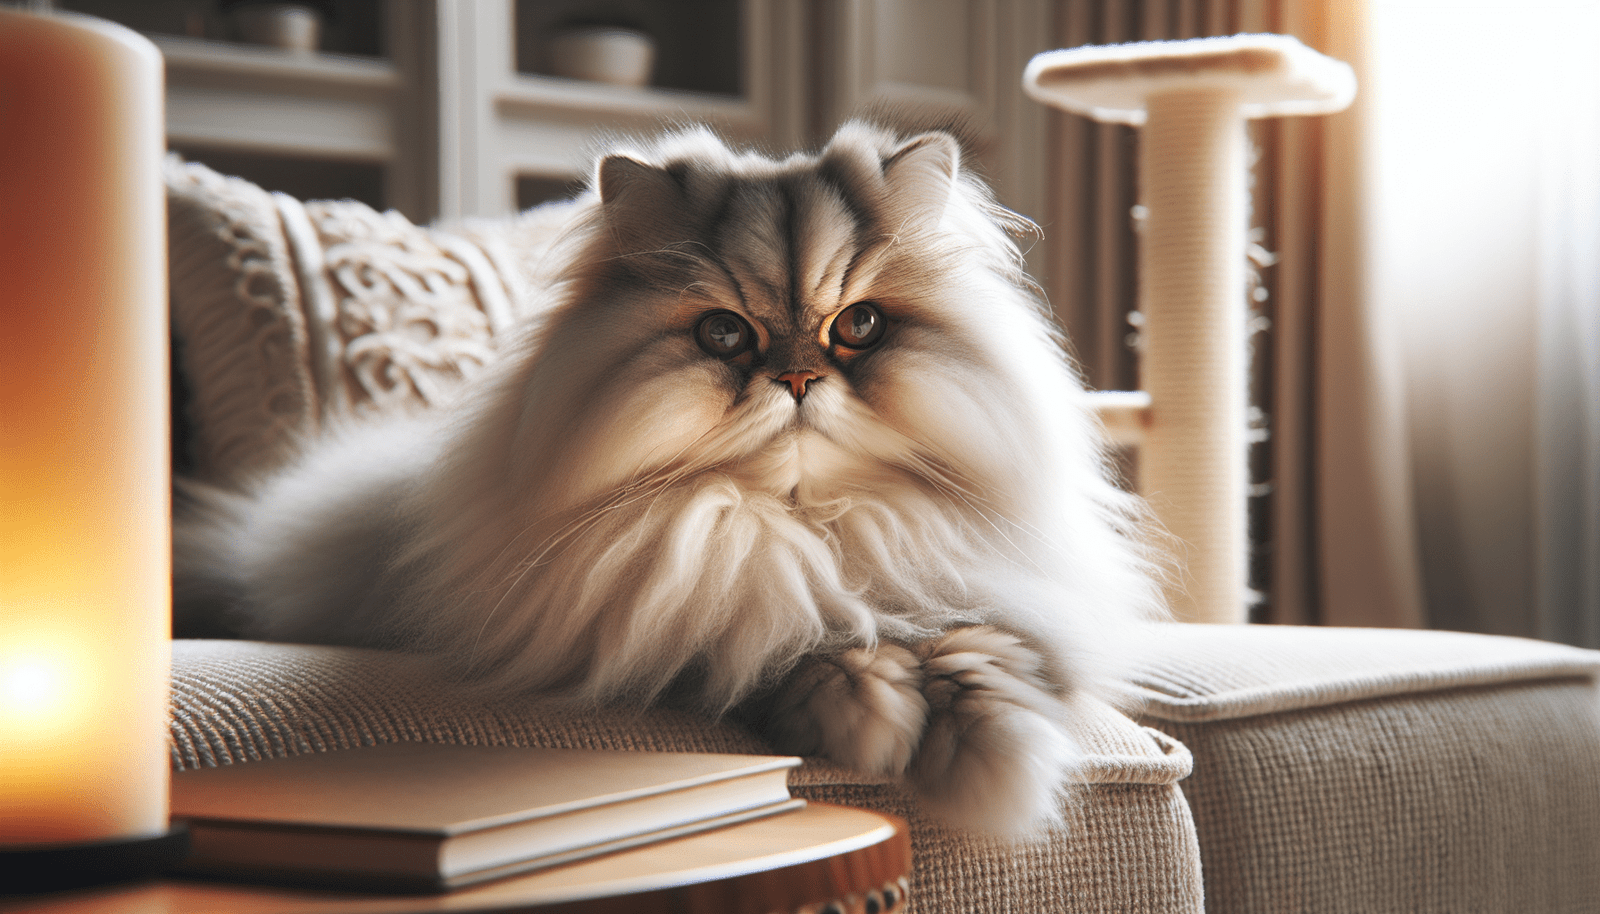 Where Can I Get My Persian Cats?